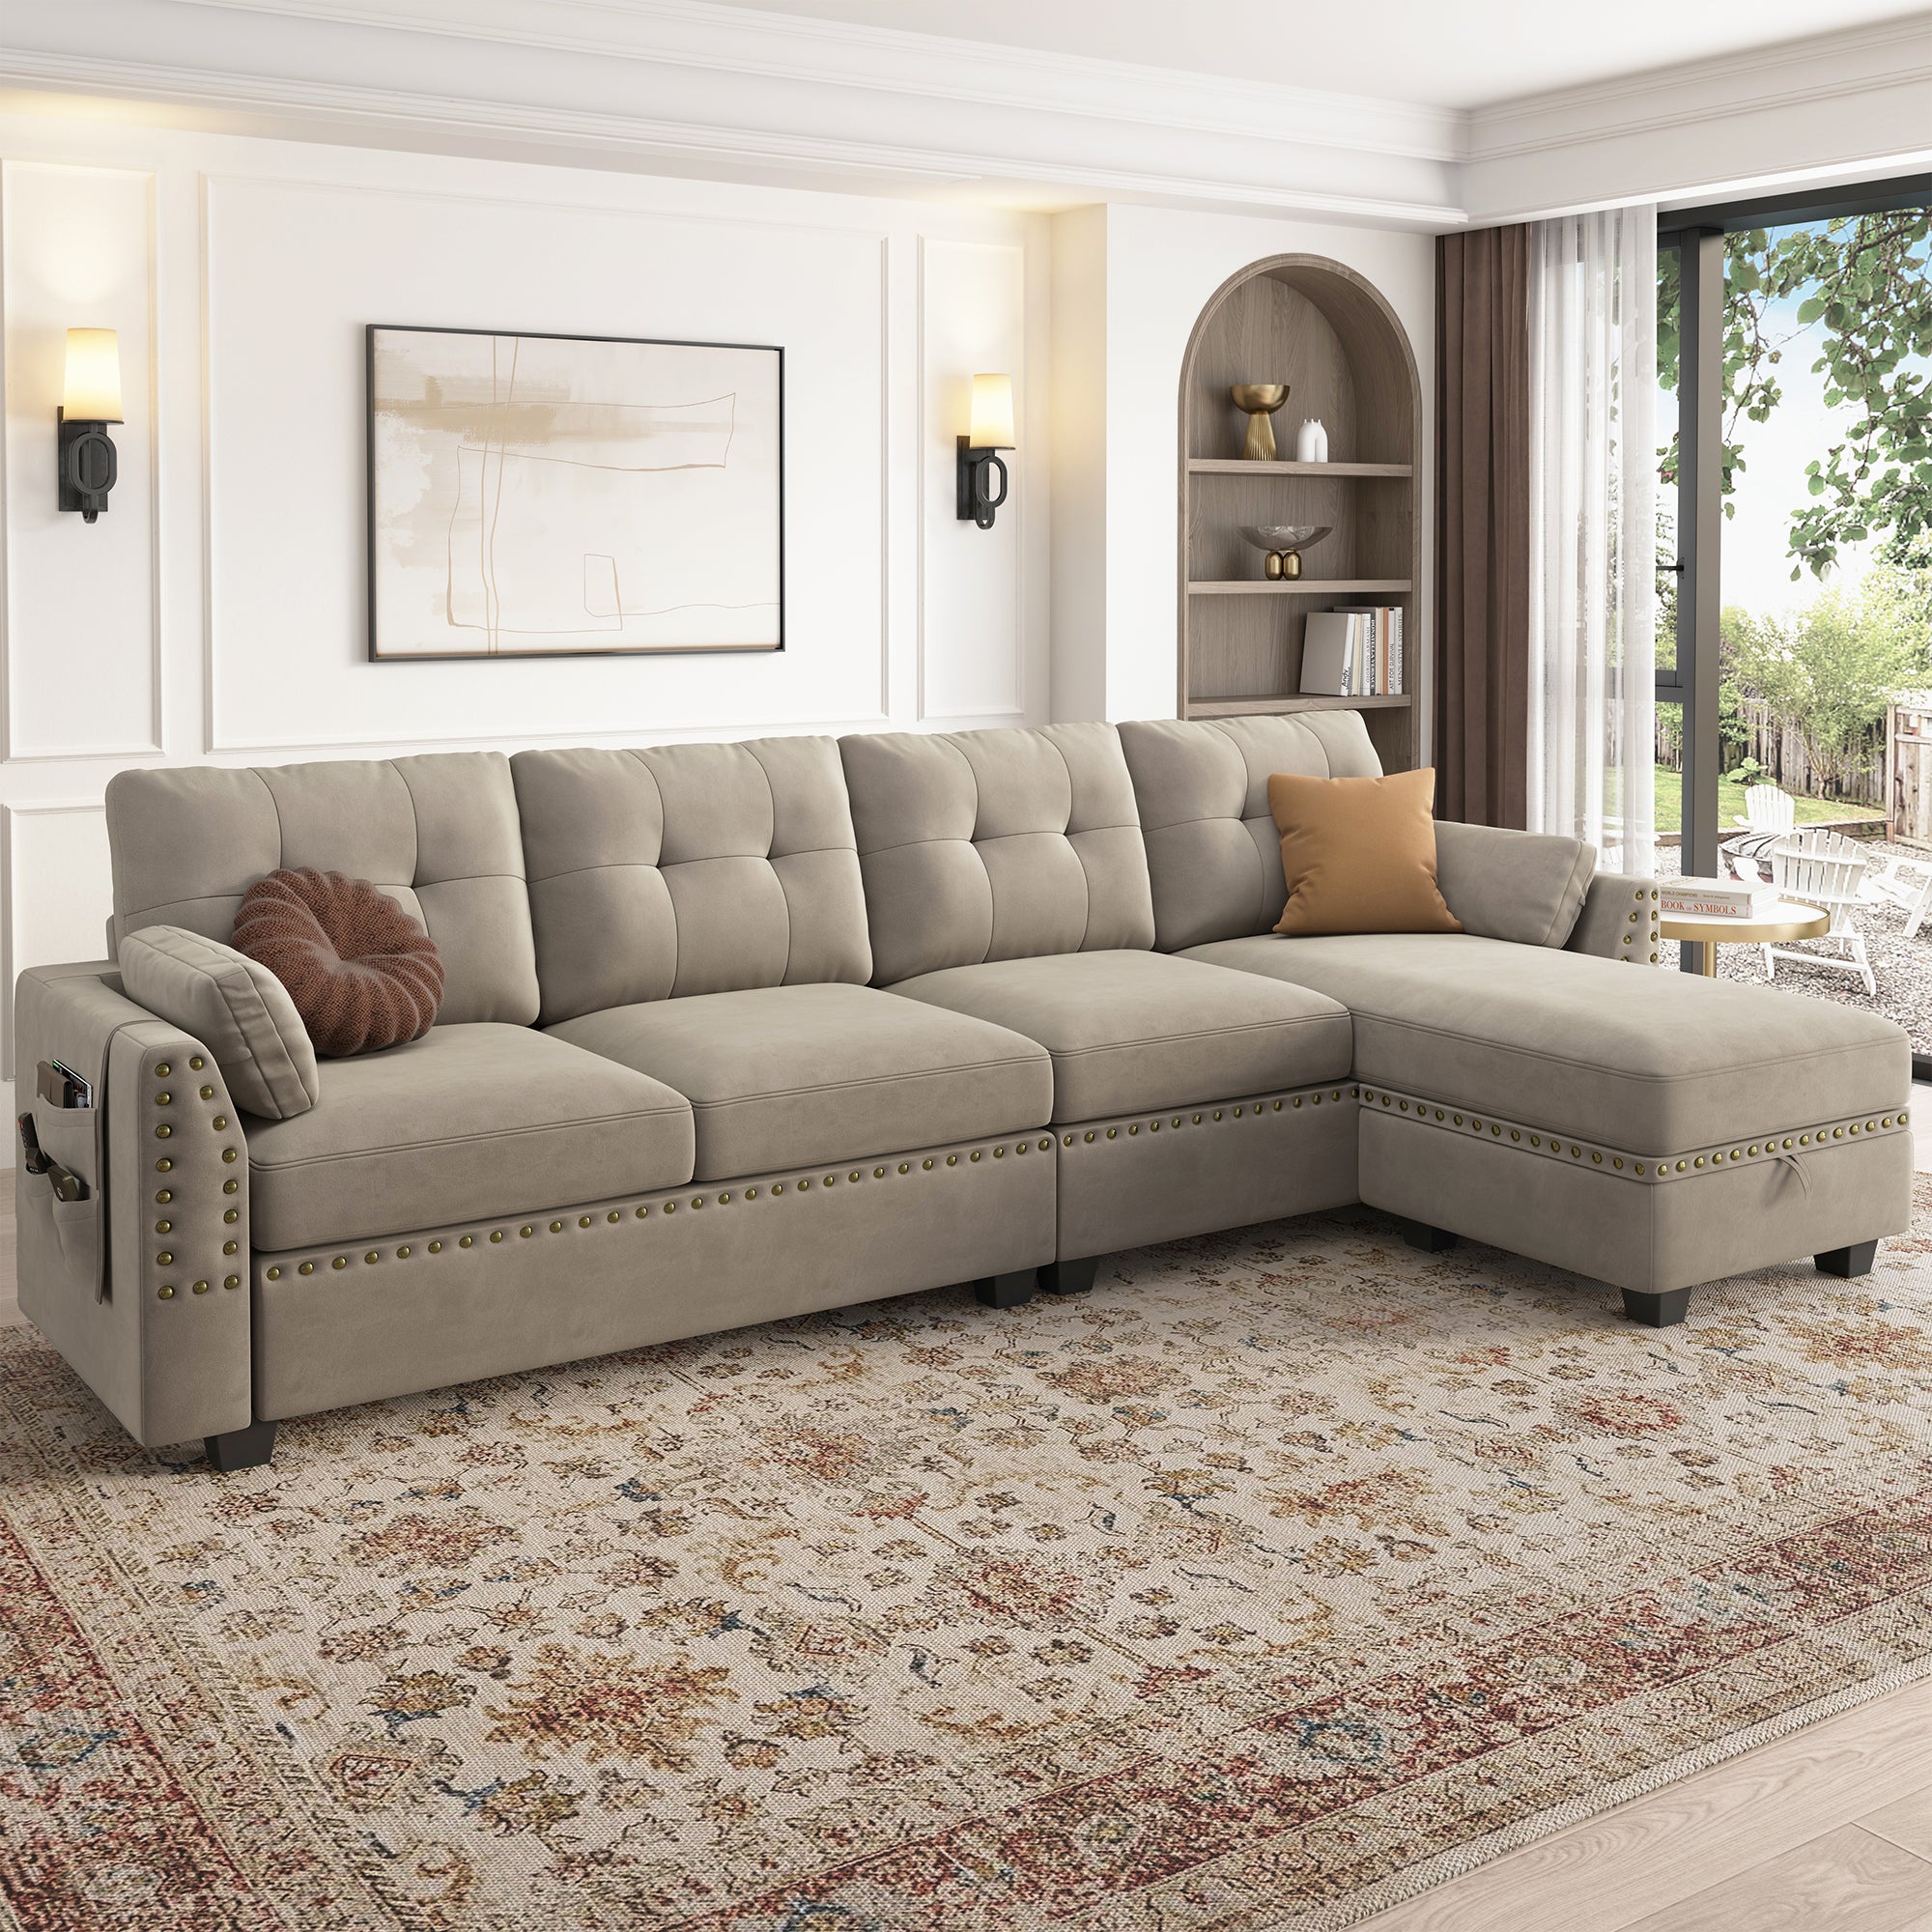 Honbay 4-Seat U-Shaped Sofa Convertible Sectional Sofa with Reversible Chaise, Velvet / Pearl Grey